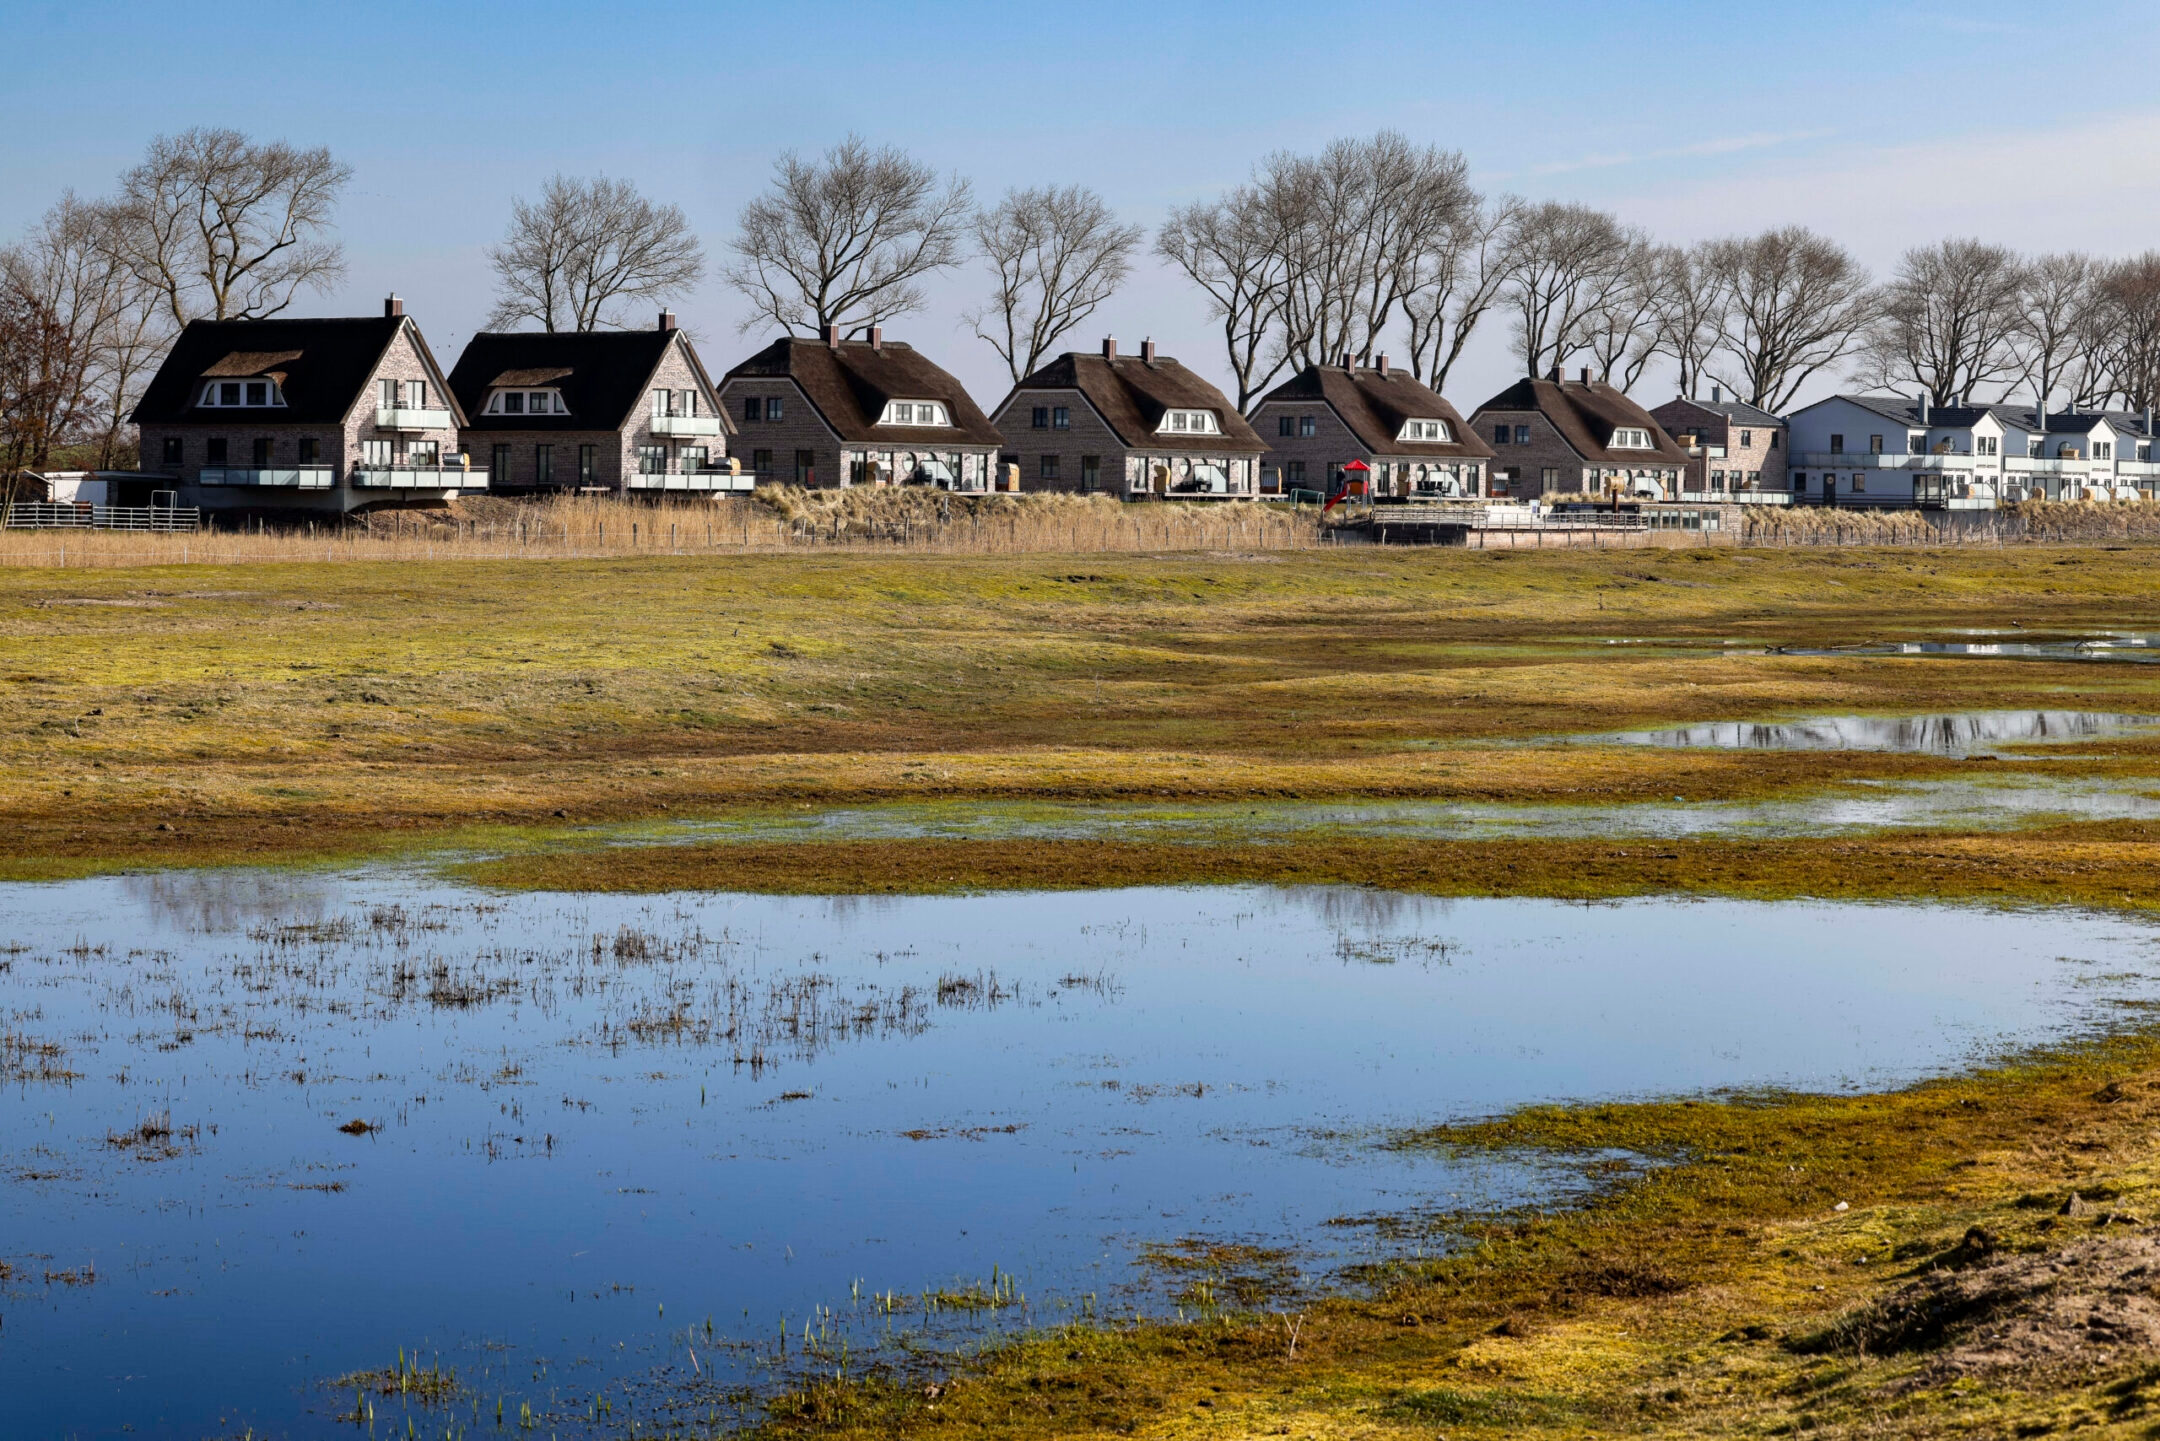 The German island of Fehmarn is home to vacation colonies and one man who is publicly advertising himself as a Jew despite not having any evidence to support his story. (Frank Molter/picture alliance via Getty Images)